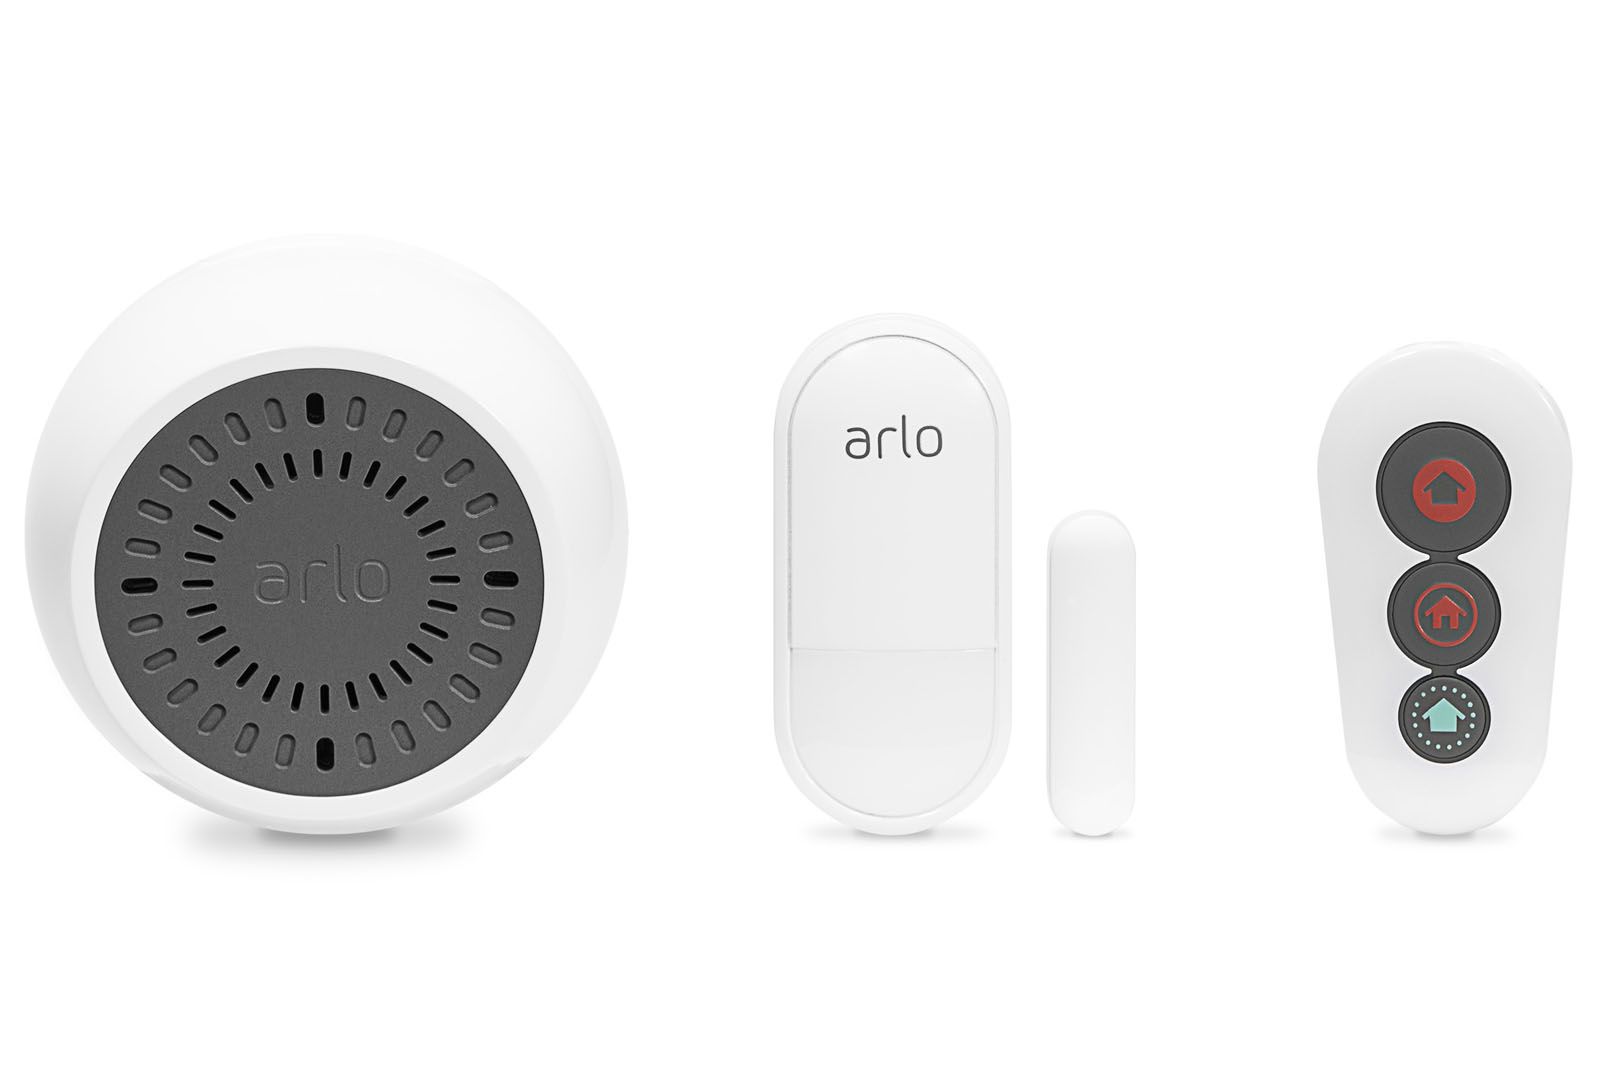 Arlo Security System contains a super-smart sensor siren and remote to boost security image 1